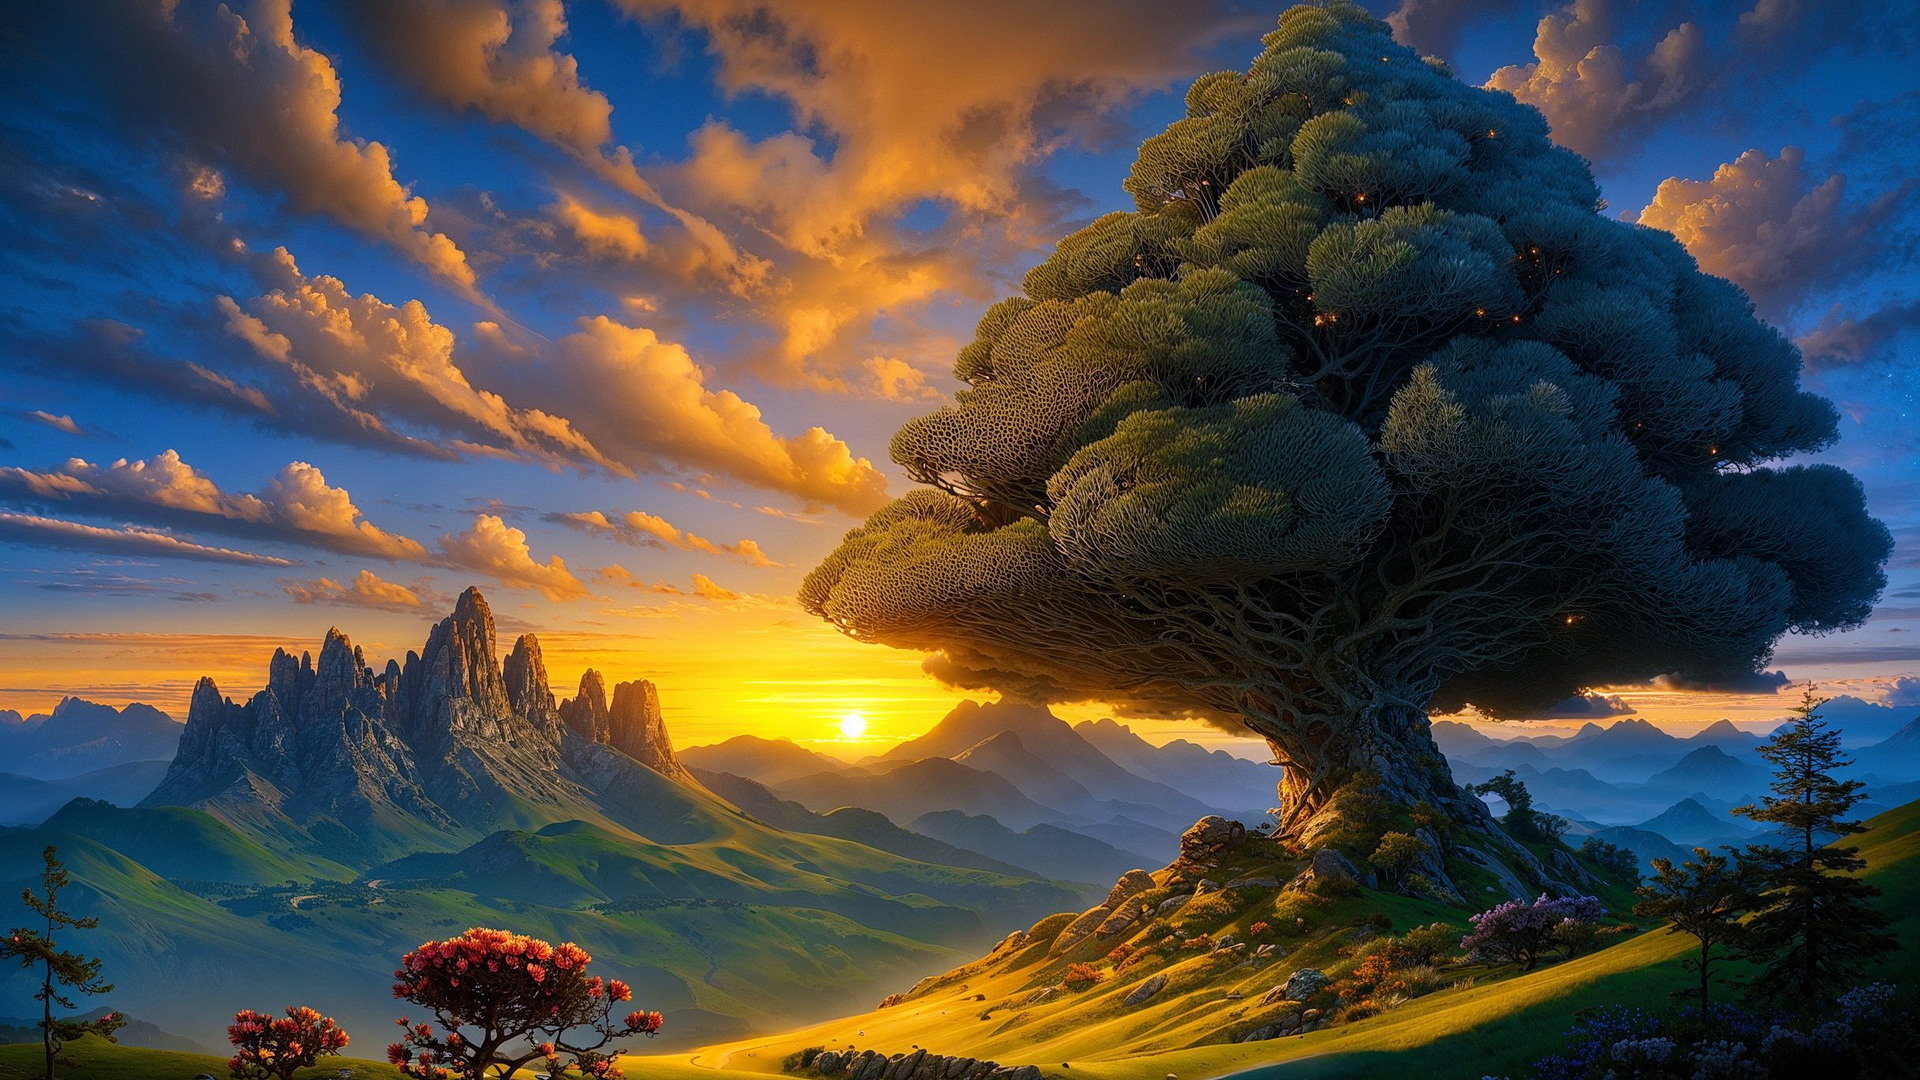 Mountain landscape and fairy tree